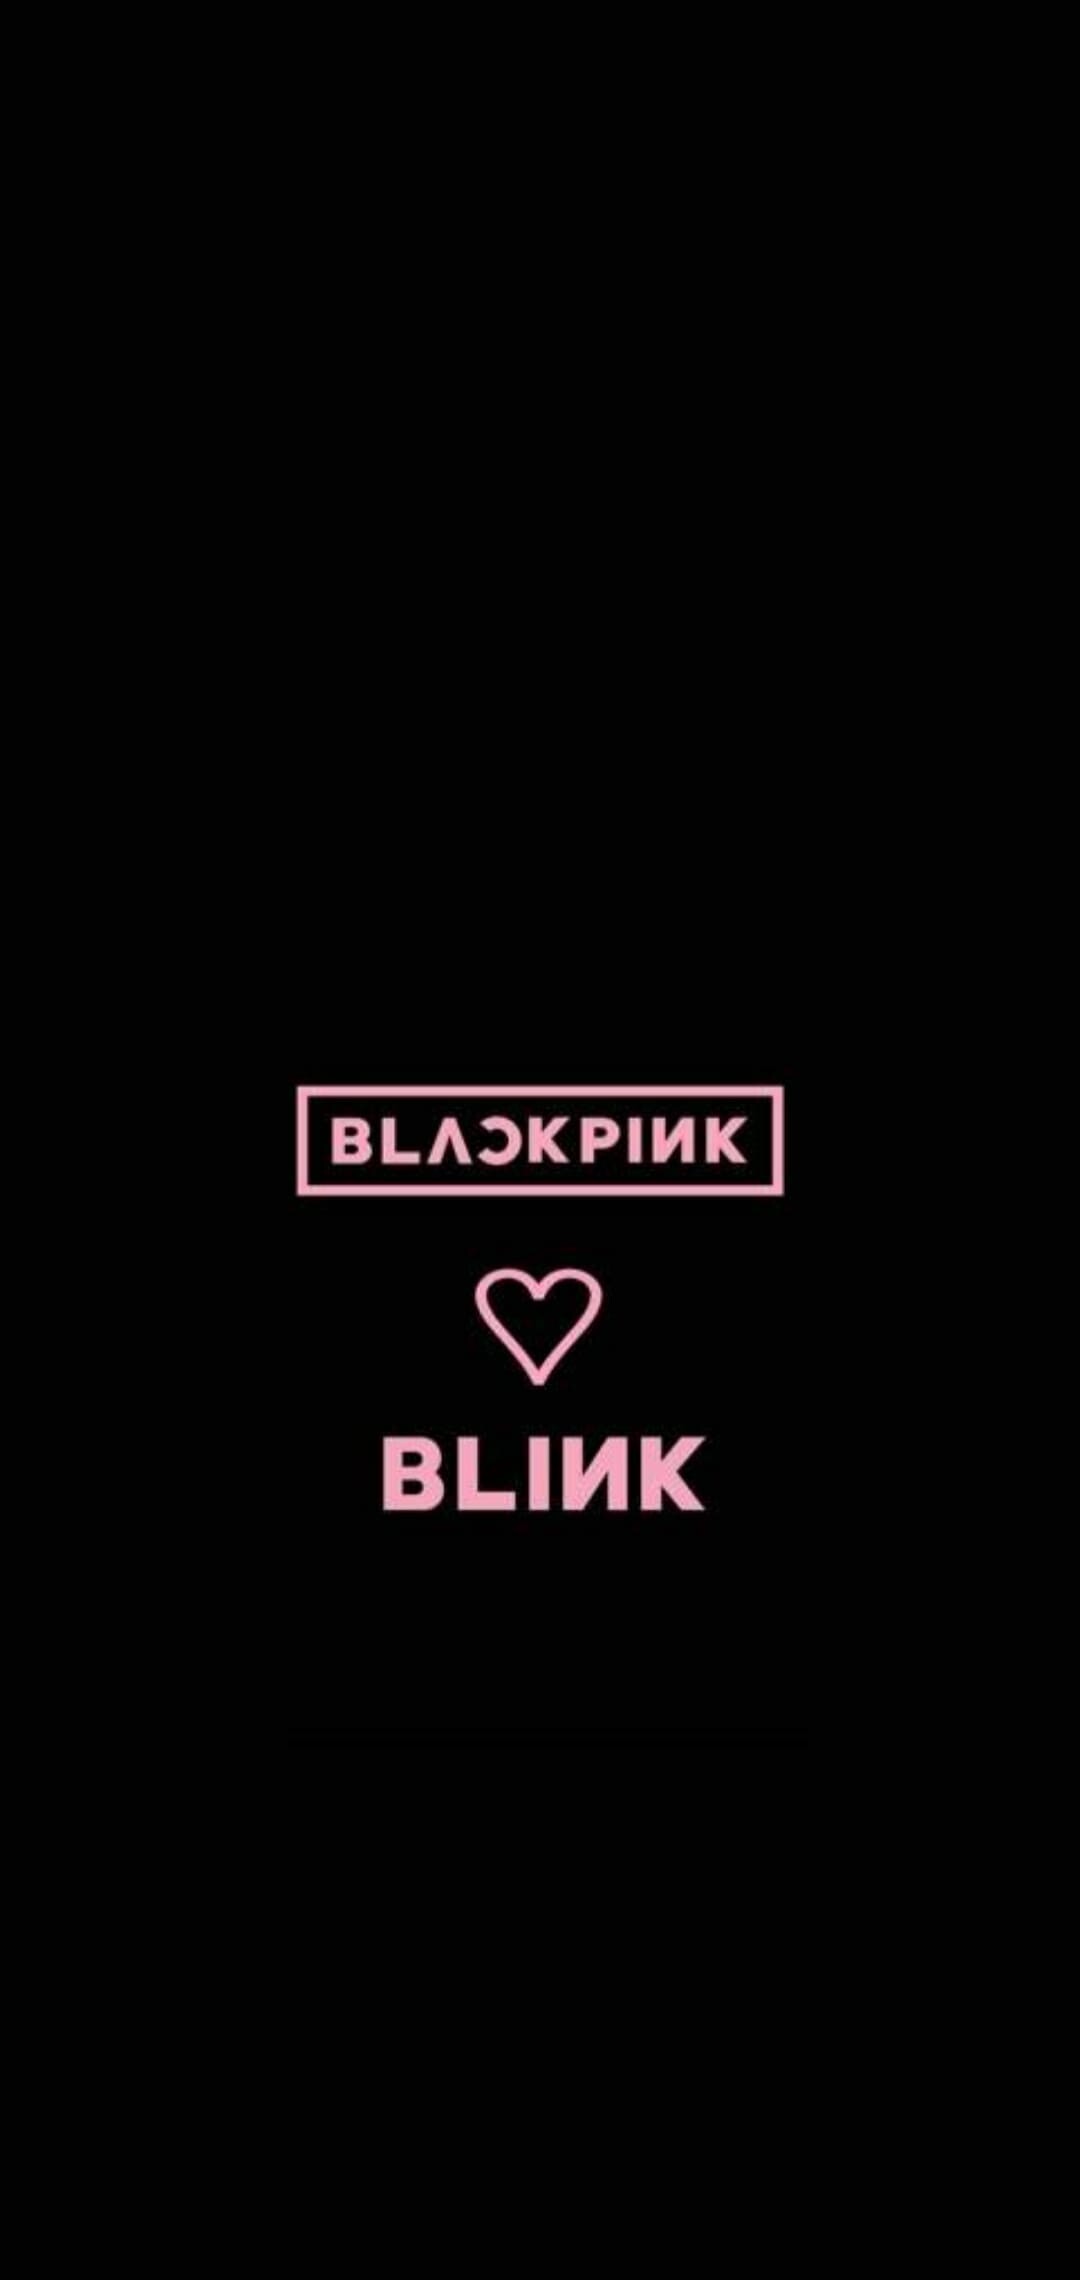 BLACKPINK: Born Pink became the first album by a K-pop girl group to reach number one on the Billboard 200. 1080x2280 HD Wallpaper.